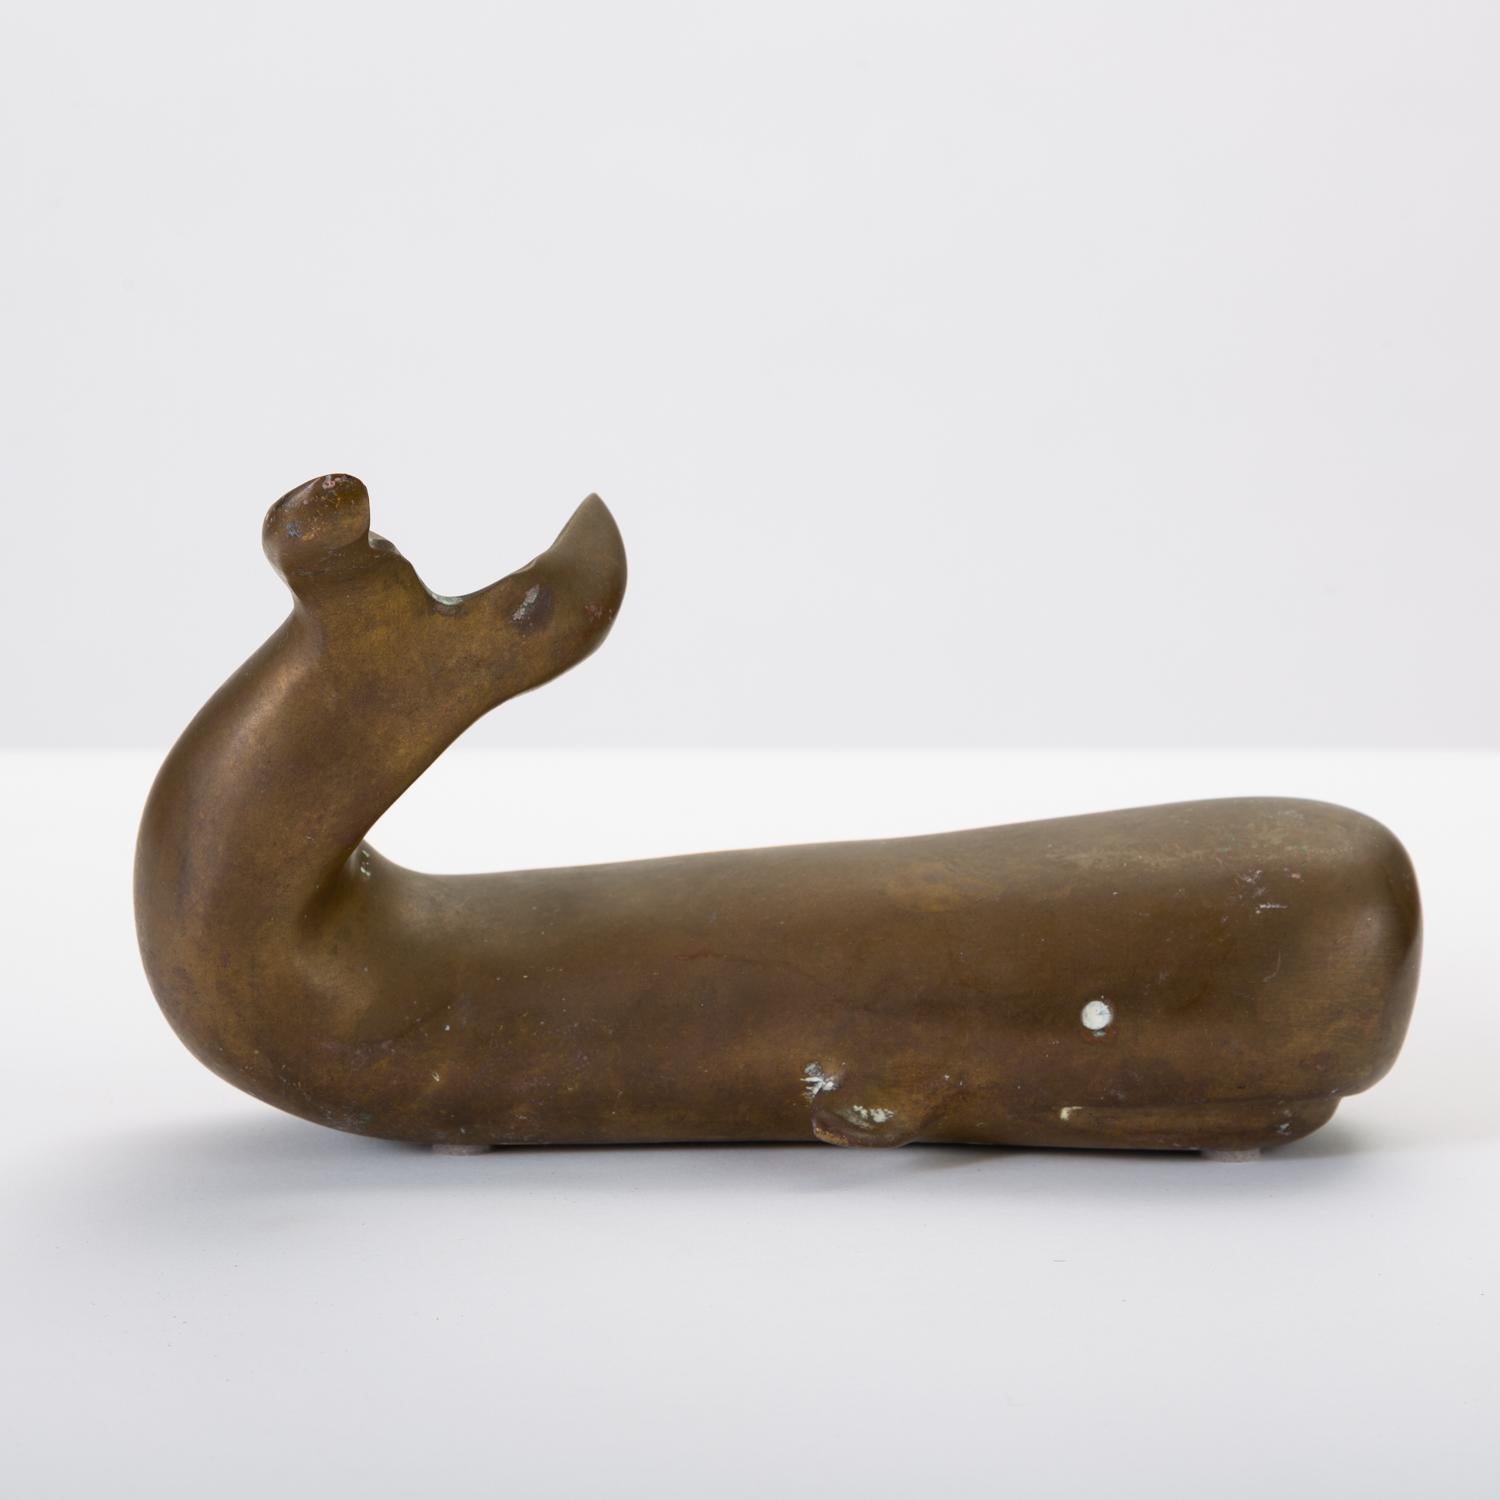 20th Century Spanish Modern Whale Paperweight in Oxidized Brass